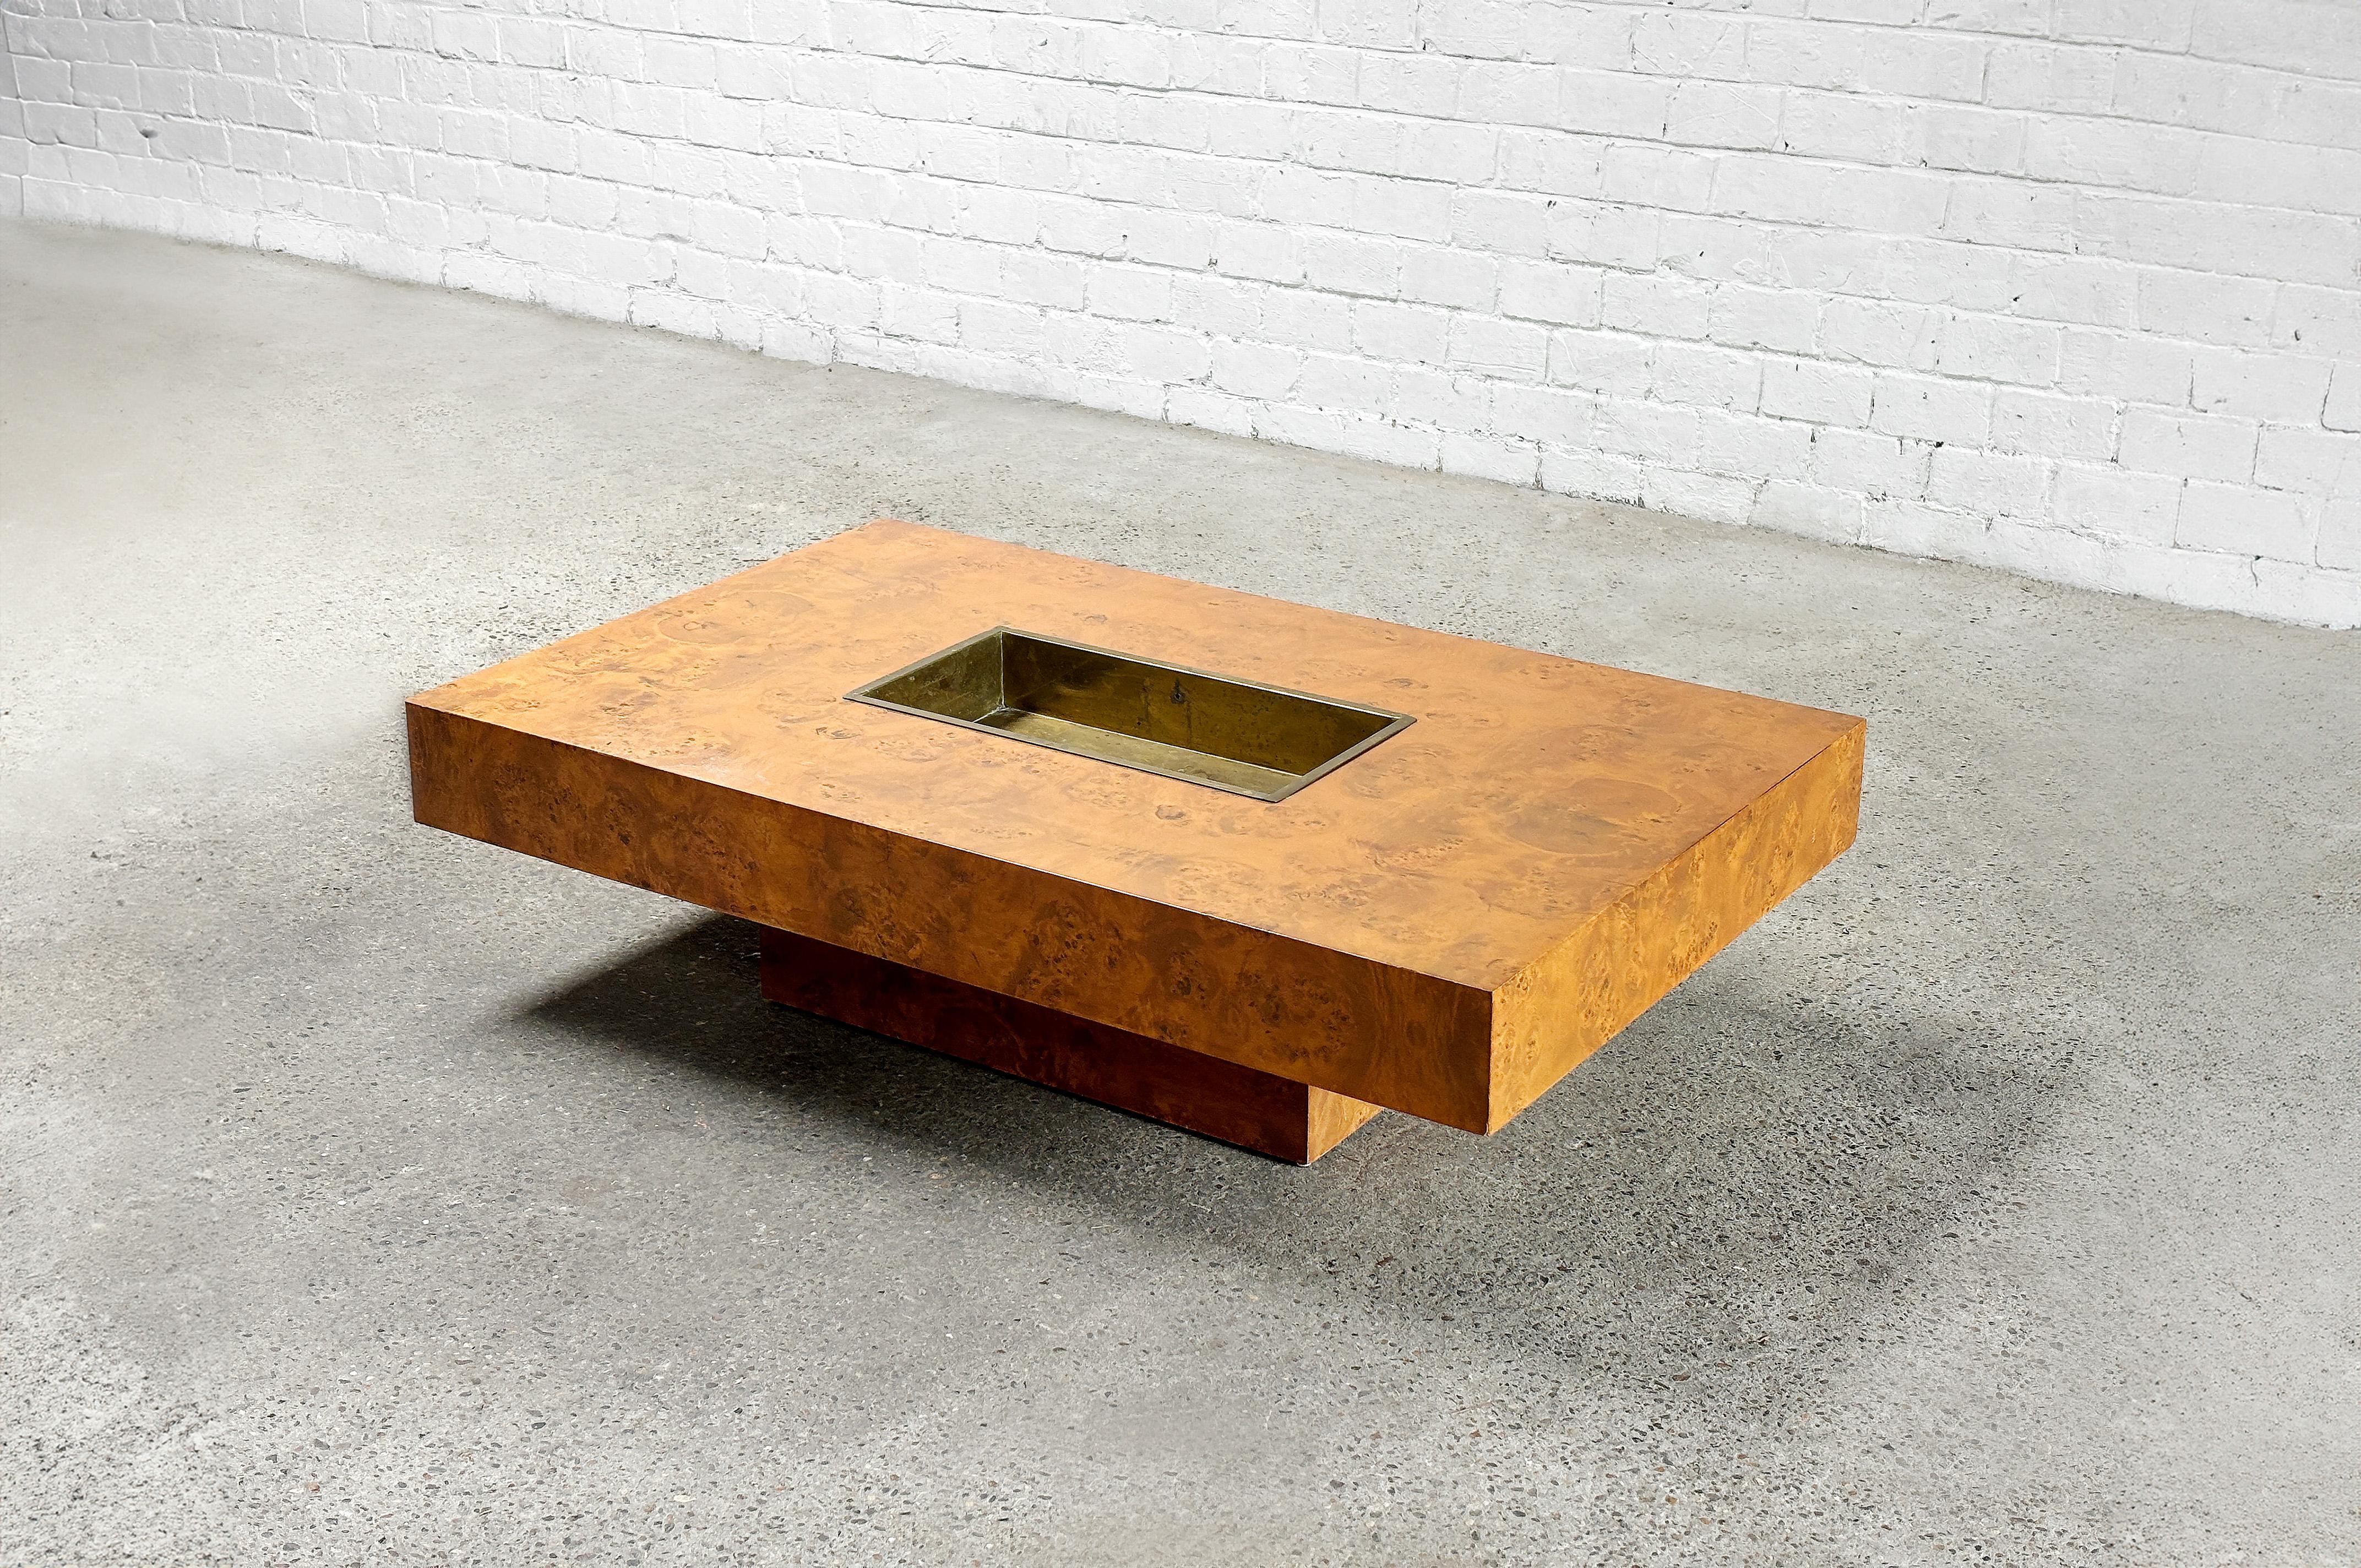 Rectangular Burl Wood coffee table designed and signed by Jean Charles for Maison Charles in the 1970's. This table is a refined tribute to the opulent ambiance of 1970s high-society glamour. Highlighted by a central brass tray, this piece offers